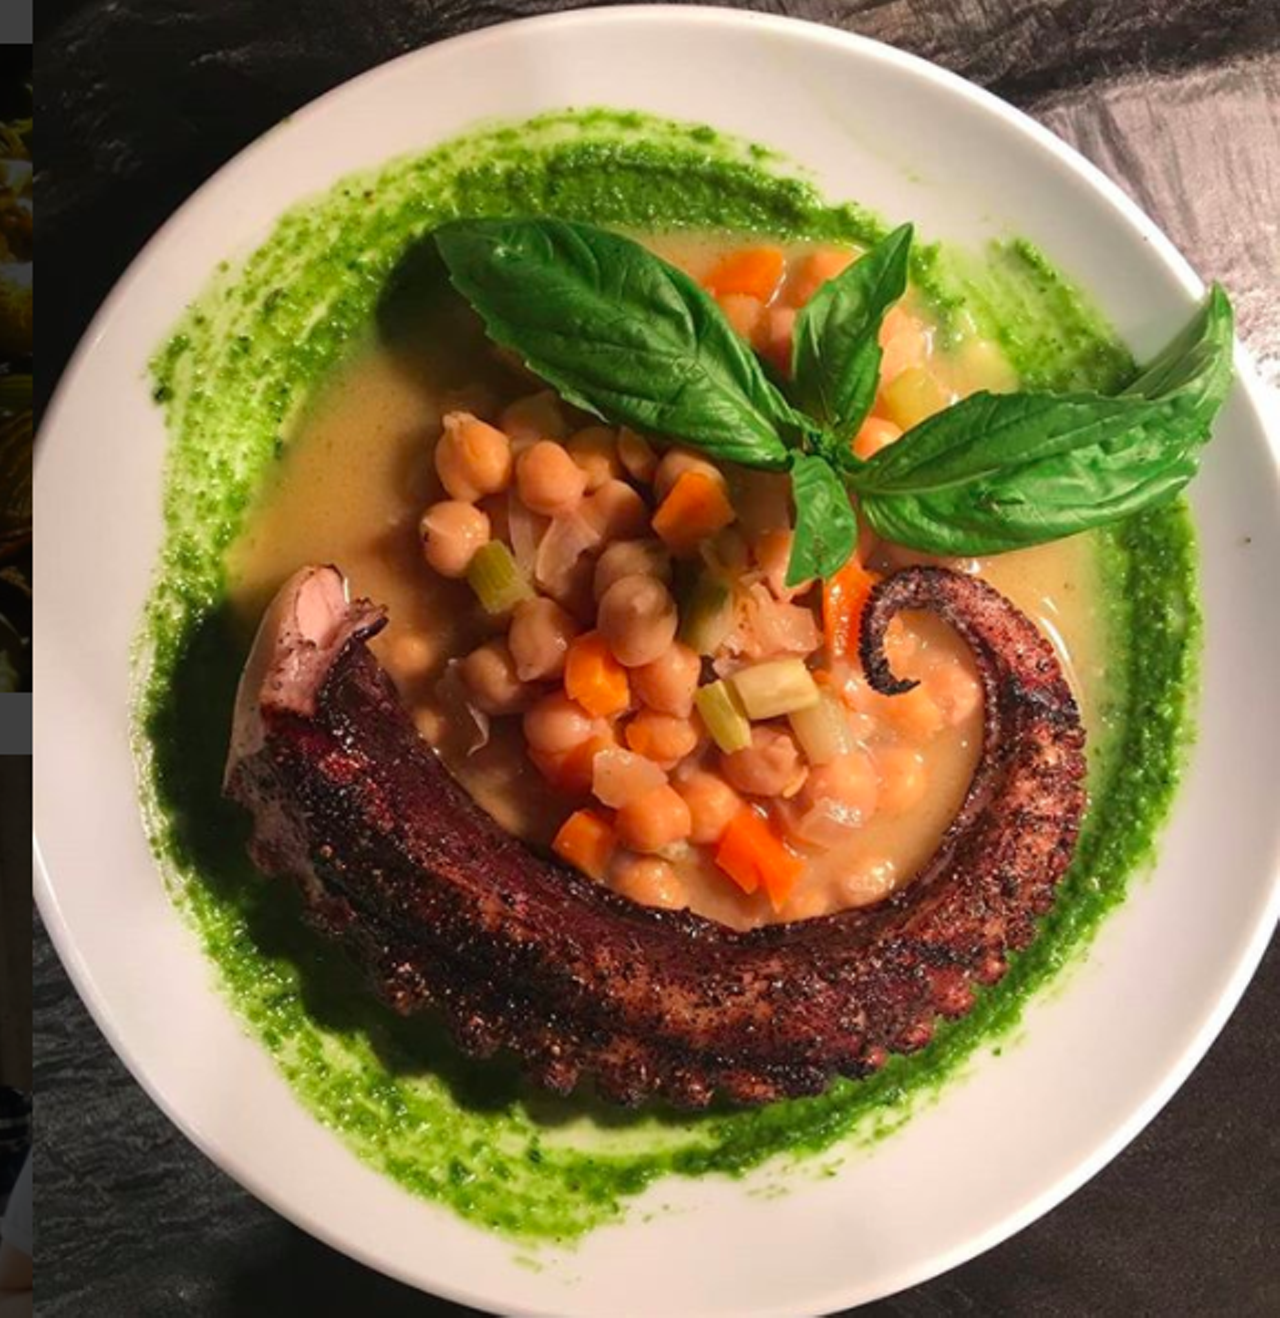 Battalion
604 S. Alamo St., (210) 816-0088, battalionsa.com
Grilled octopus meets a bright pesto with braised chickpeas that'll leave you wanting more.
Photo via Instagram / battalionsa